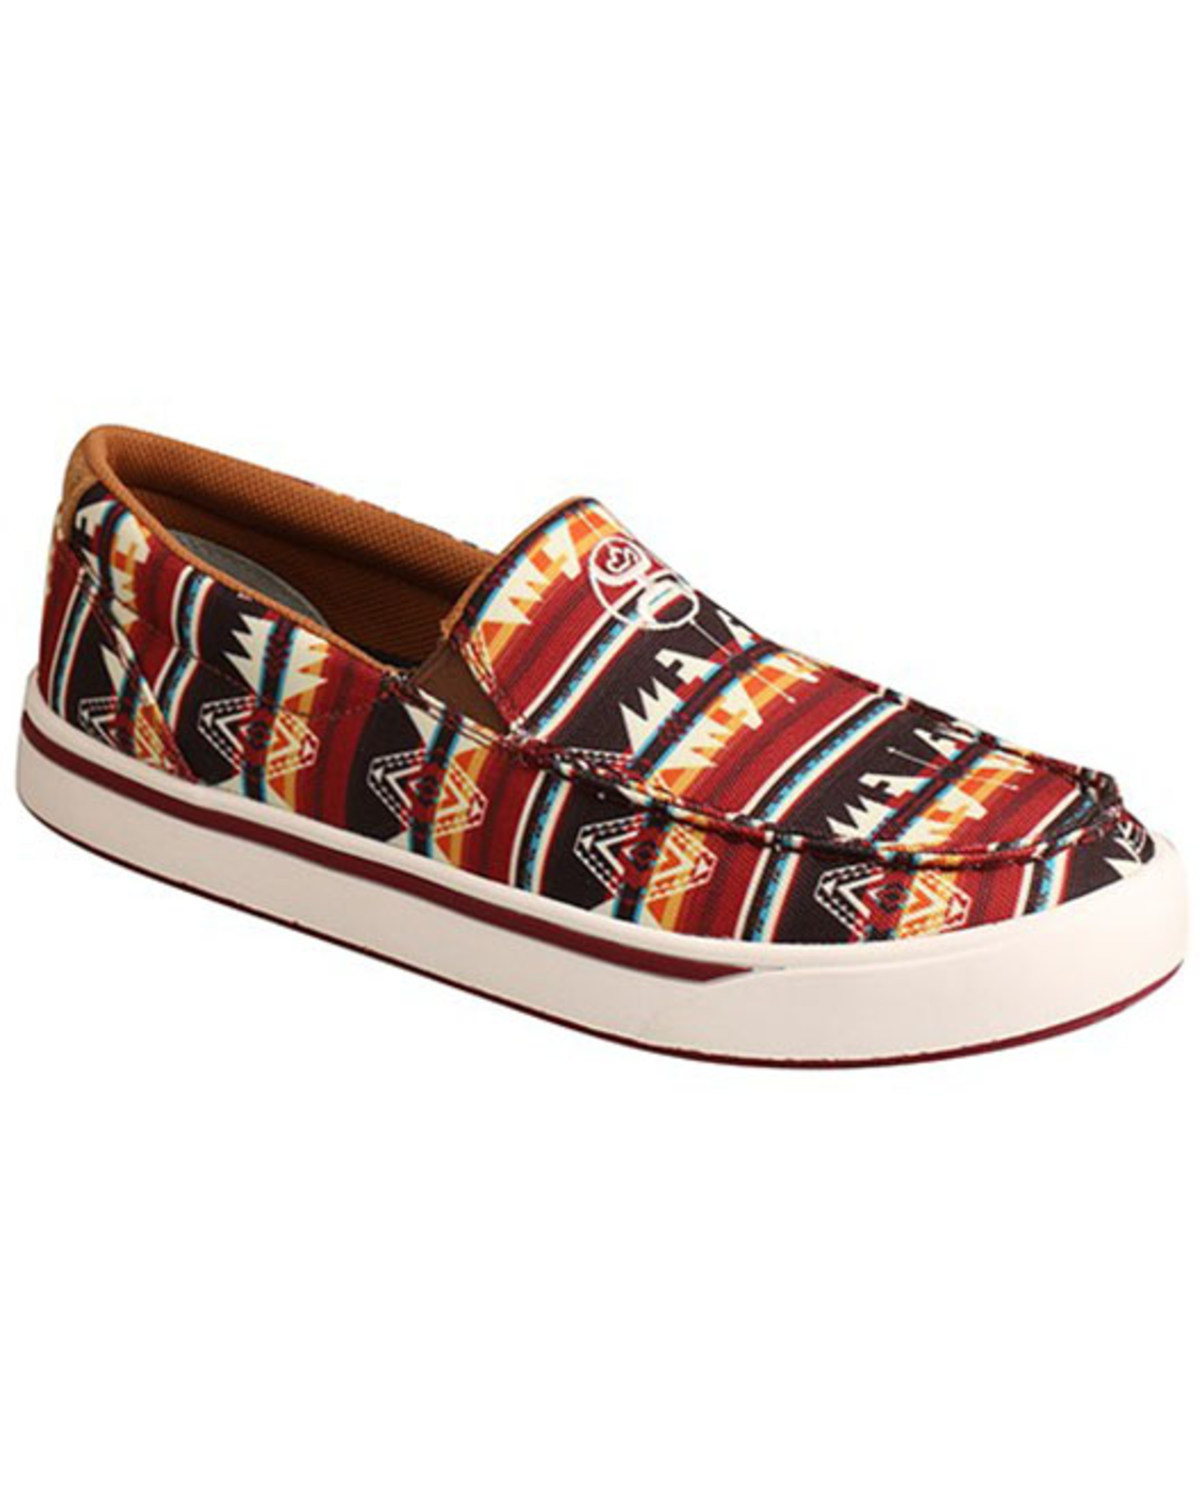 Hooey by Twisted X Men's Totem Slip-On Lopers